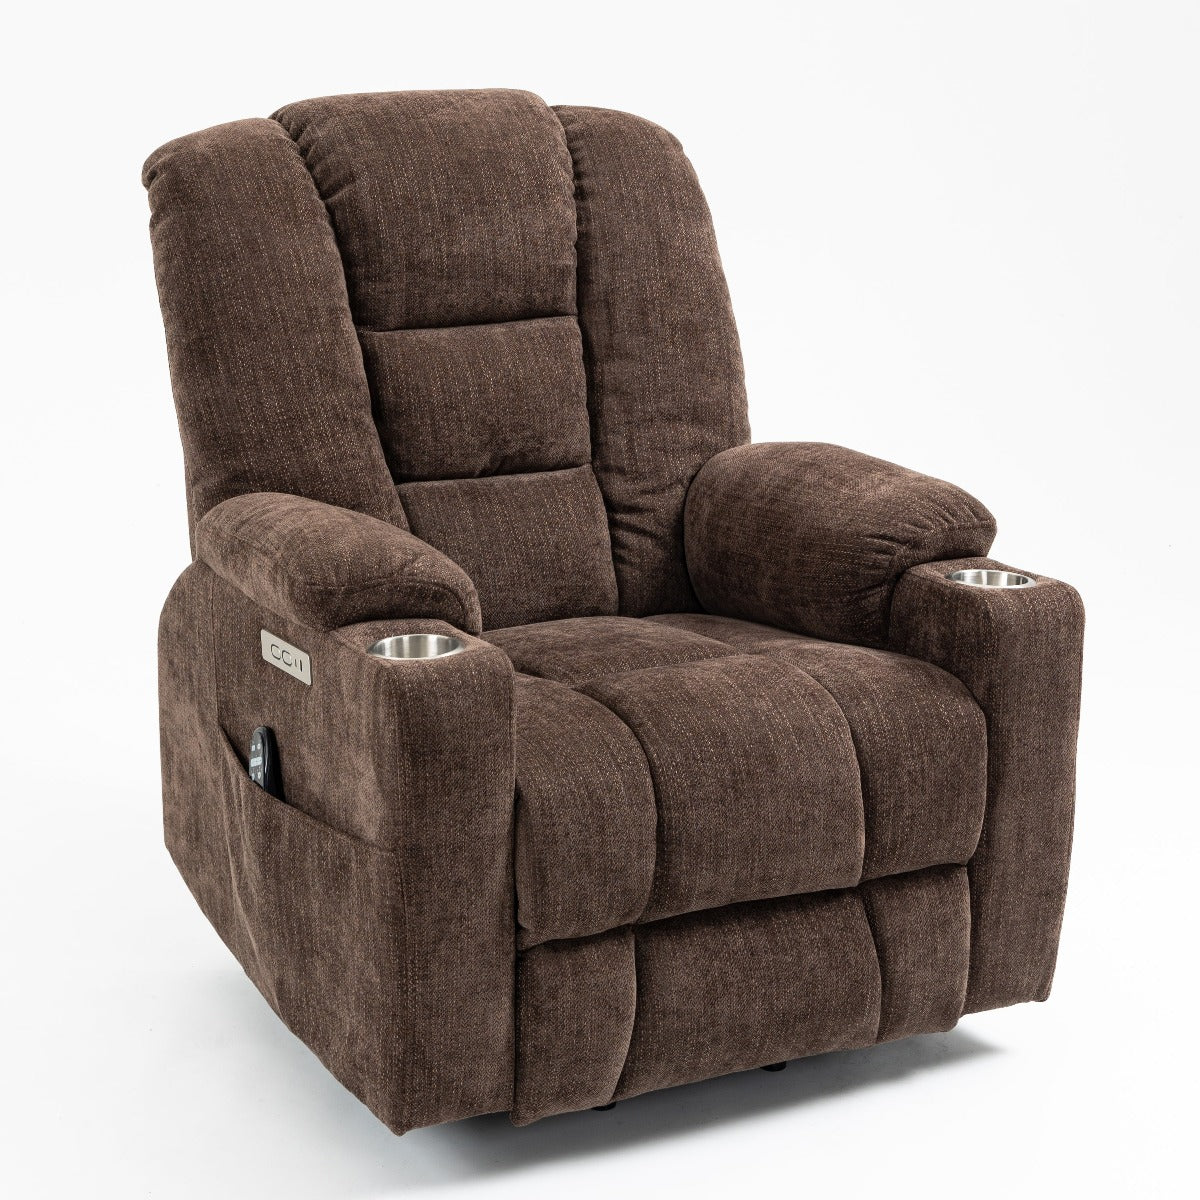 EMON's Power Lift Recliner, seated angle view - My Lift Chair